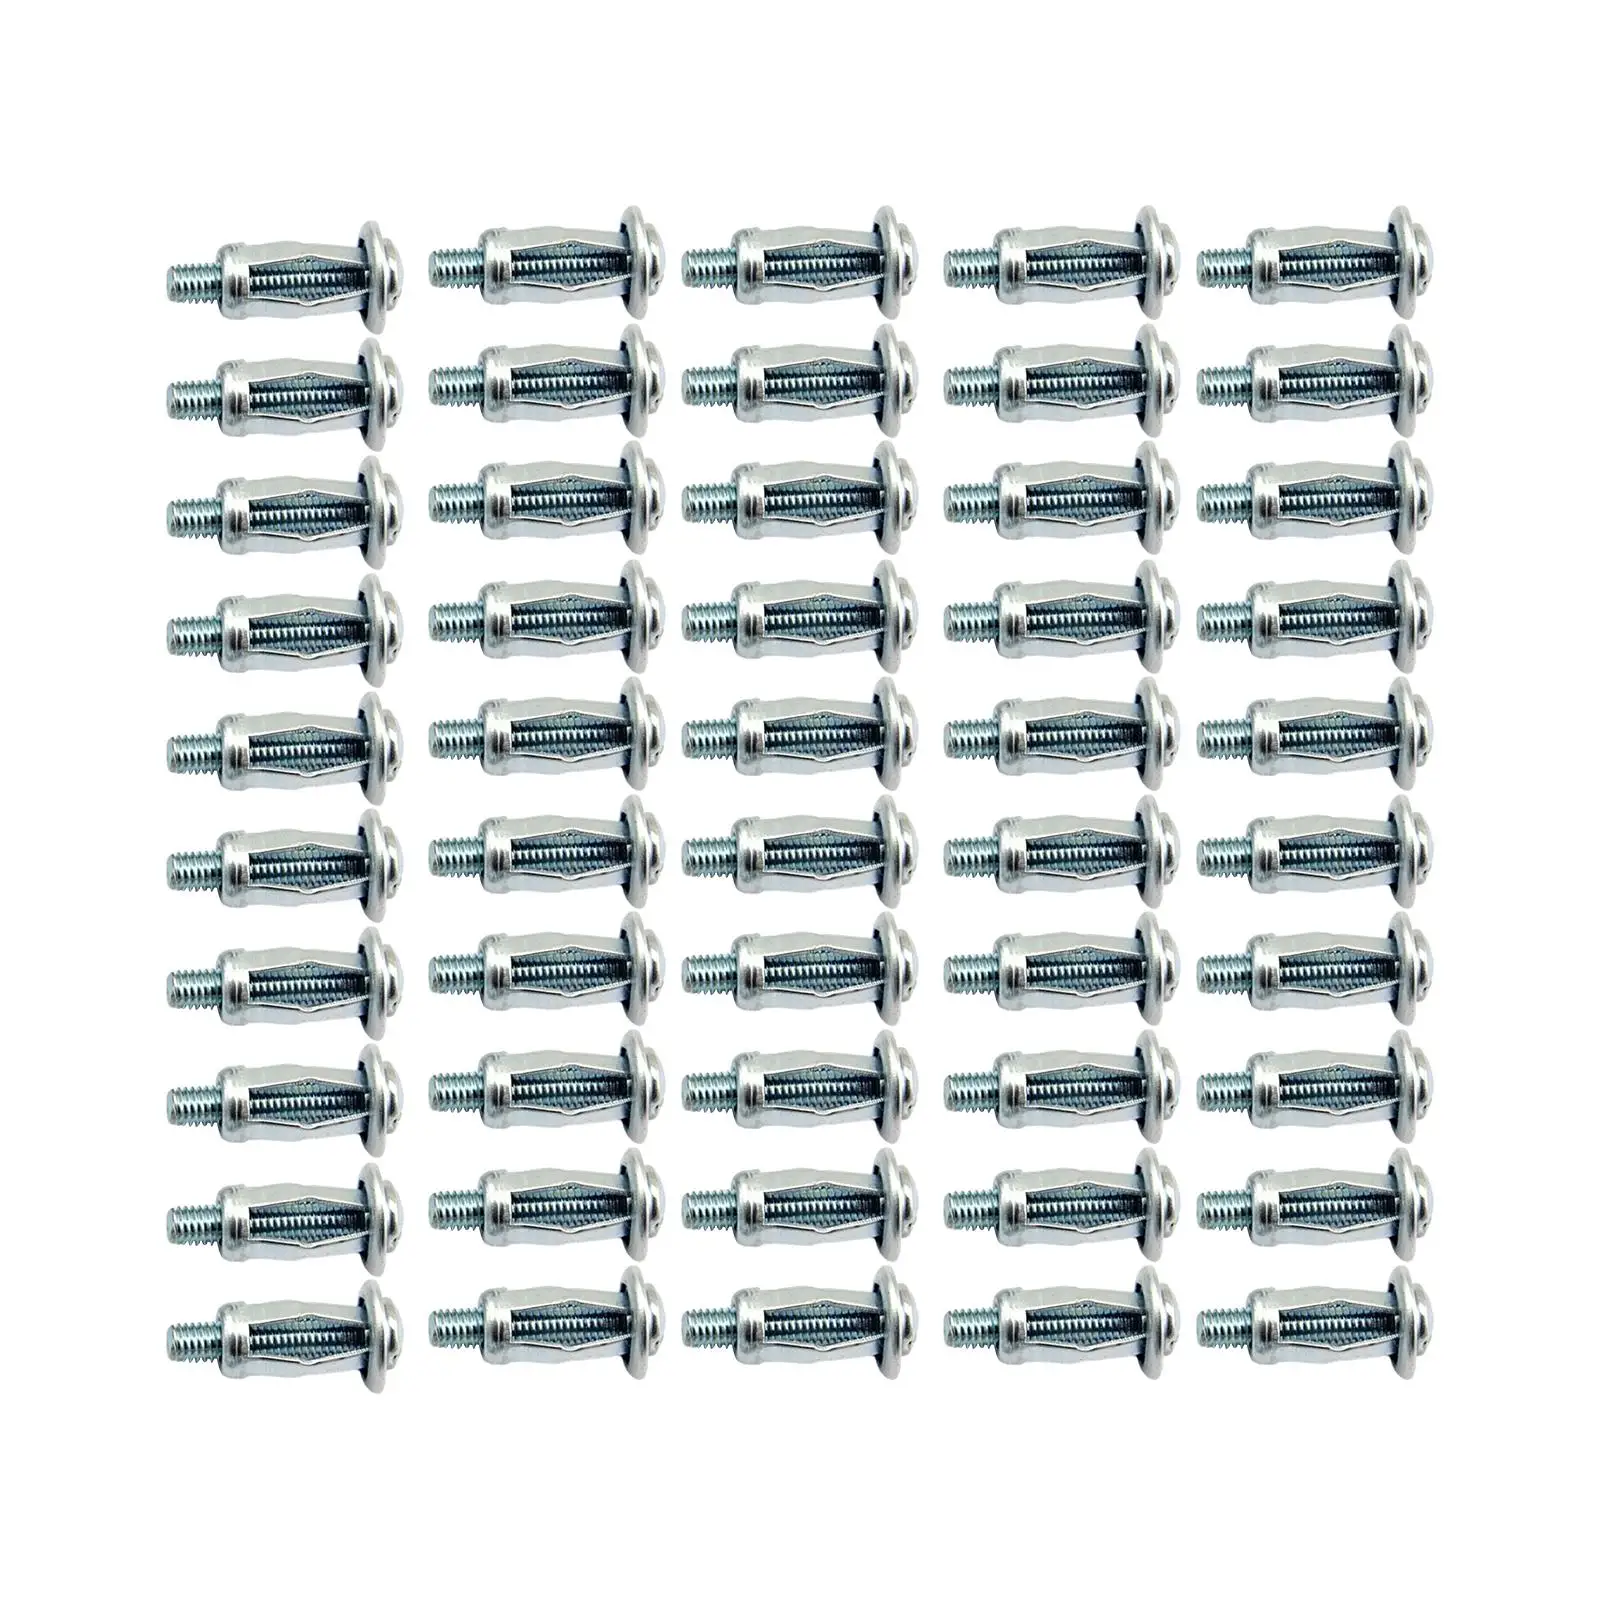 50 Pieces Jack Nuts Petal Nuts Expansion Bolts Fixings Dowels with Screws Assembly Insert Nuts for Thin Soft Wall Hollow Wall